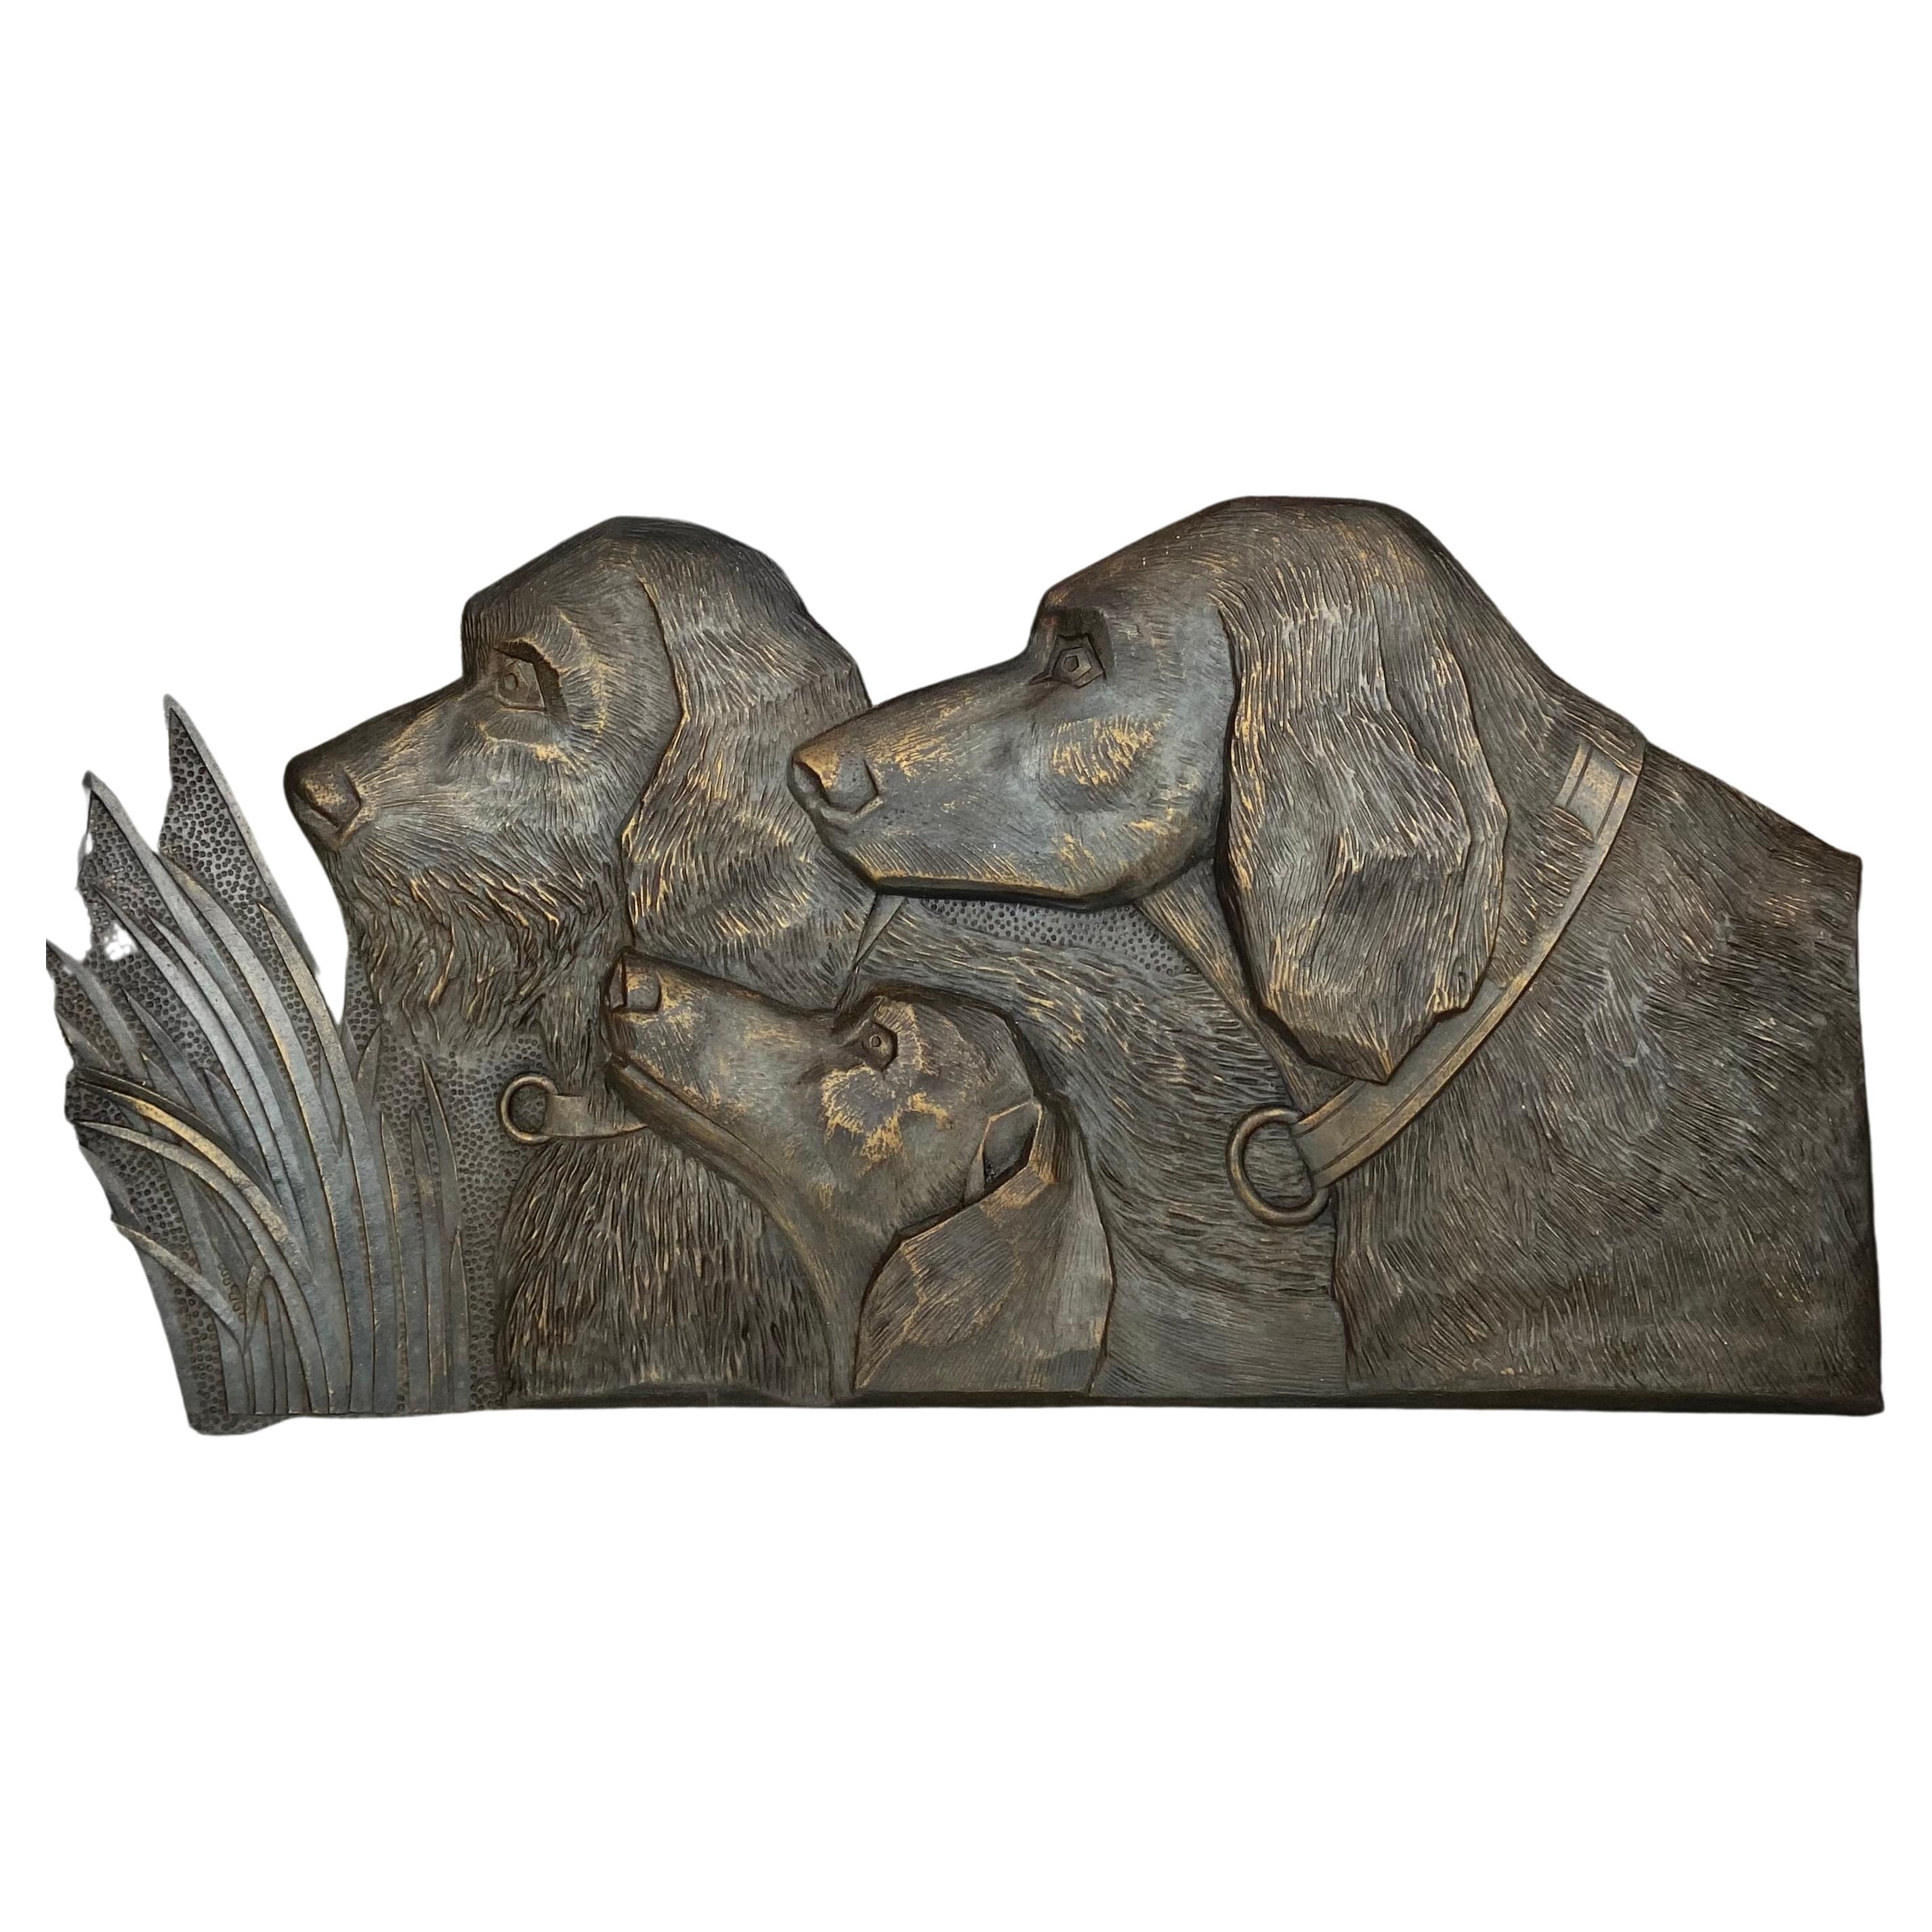 Wall plate in relief with 3 dog's heads. Three different dog breeds, three different hunting dogs. The relief is in bronzed eternite, with 4 holes to hang up.